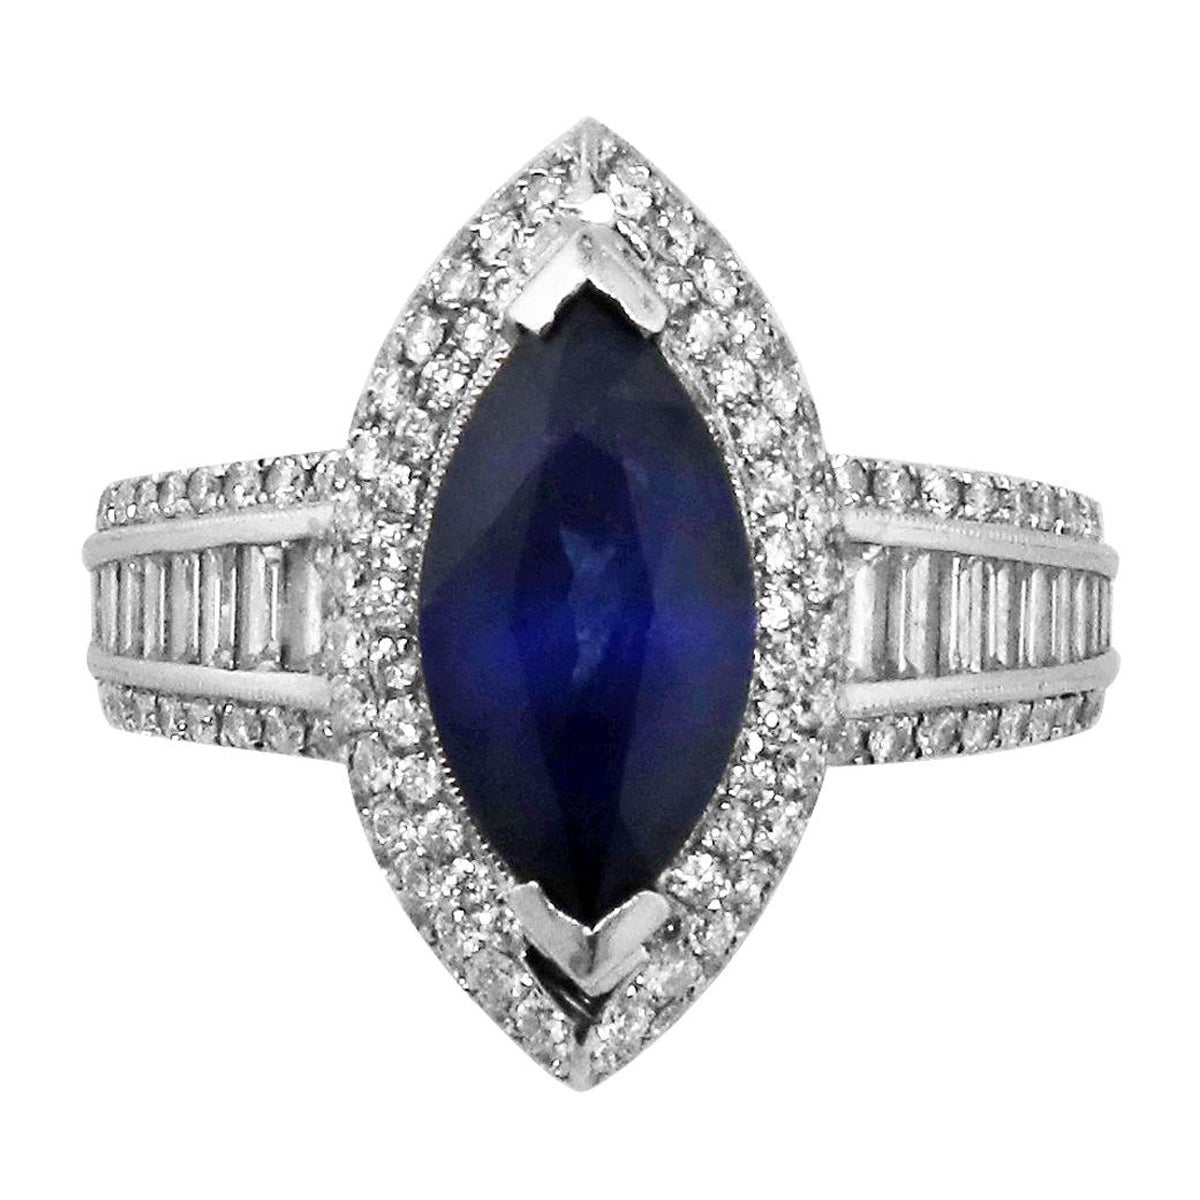 2 Carat Sapphire Ring For Sale